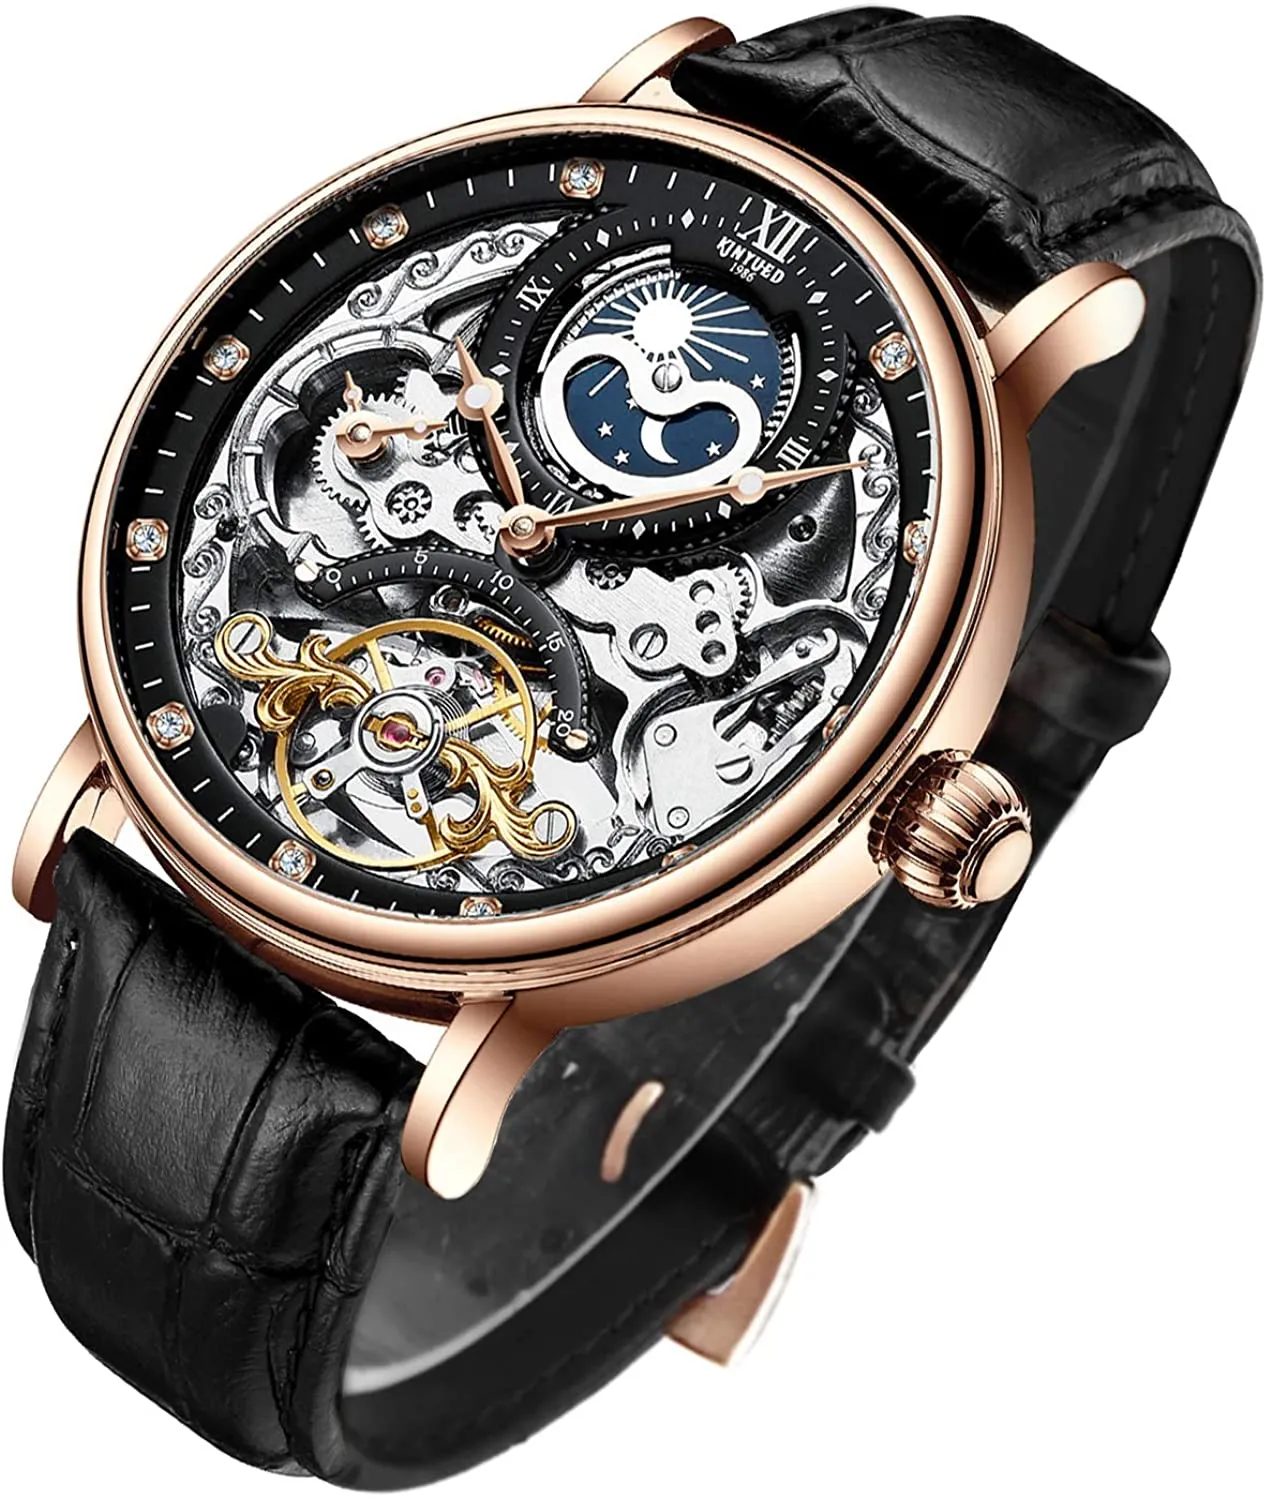 Mens Luxury Skeleton Automatic Mechanical Wrist Watches Leather Moon Phrase Luminous Hands Self-Wind Wristwatch2202